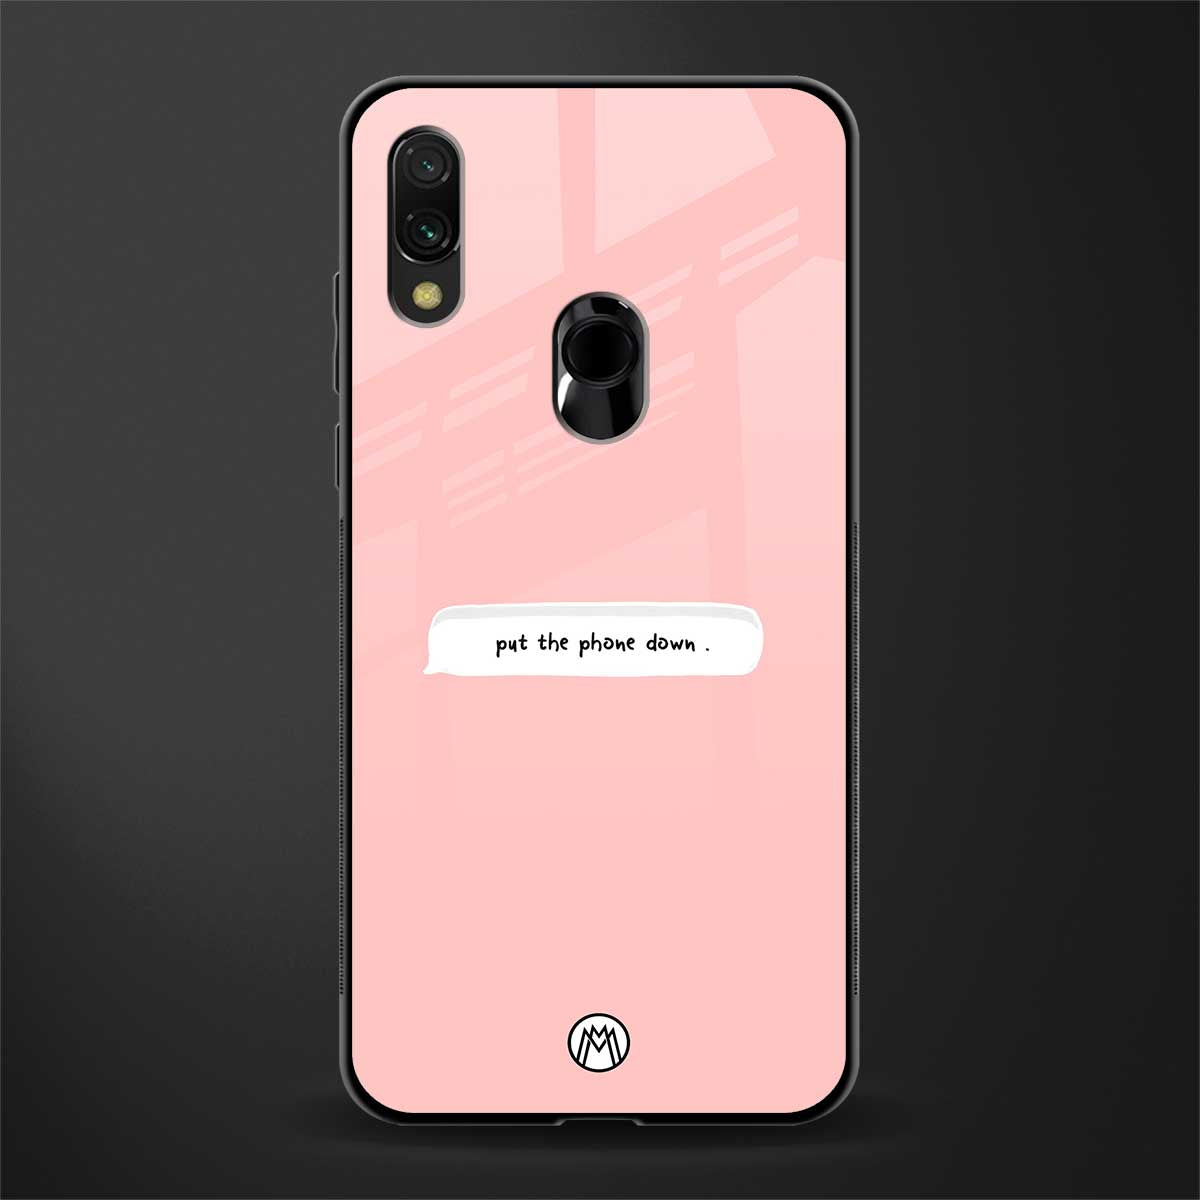 put the phone down glass case for redmi y3 image